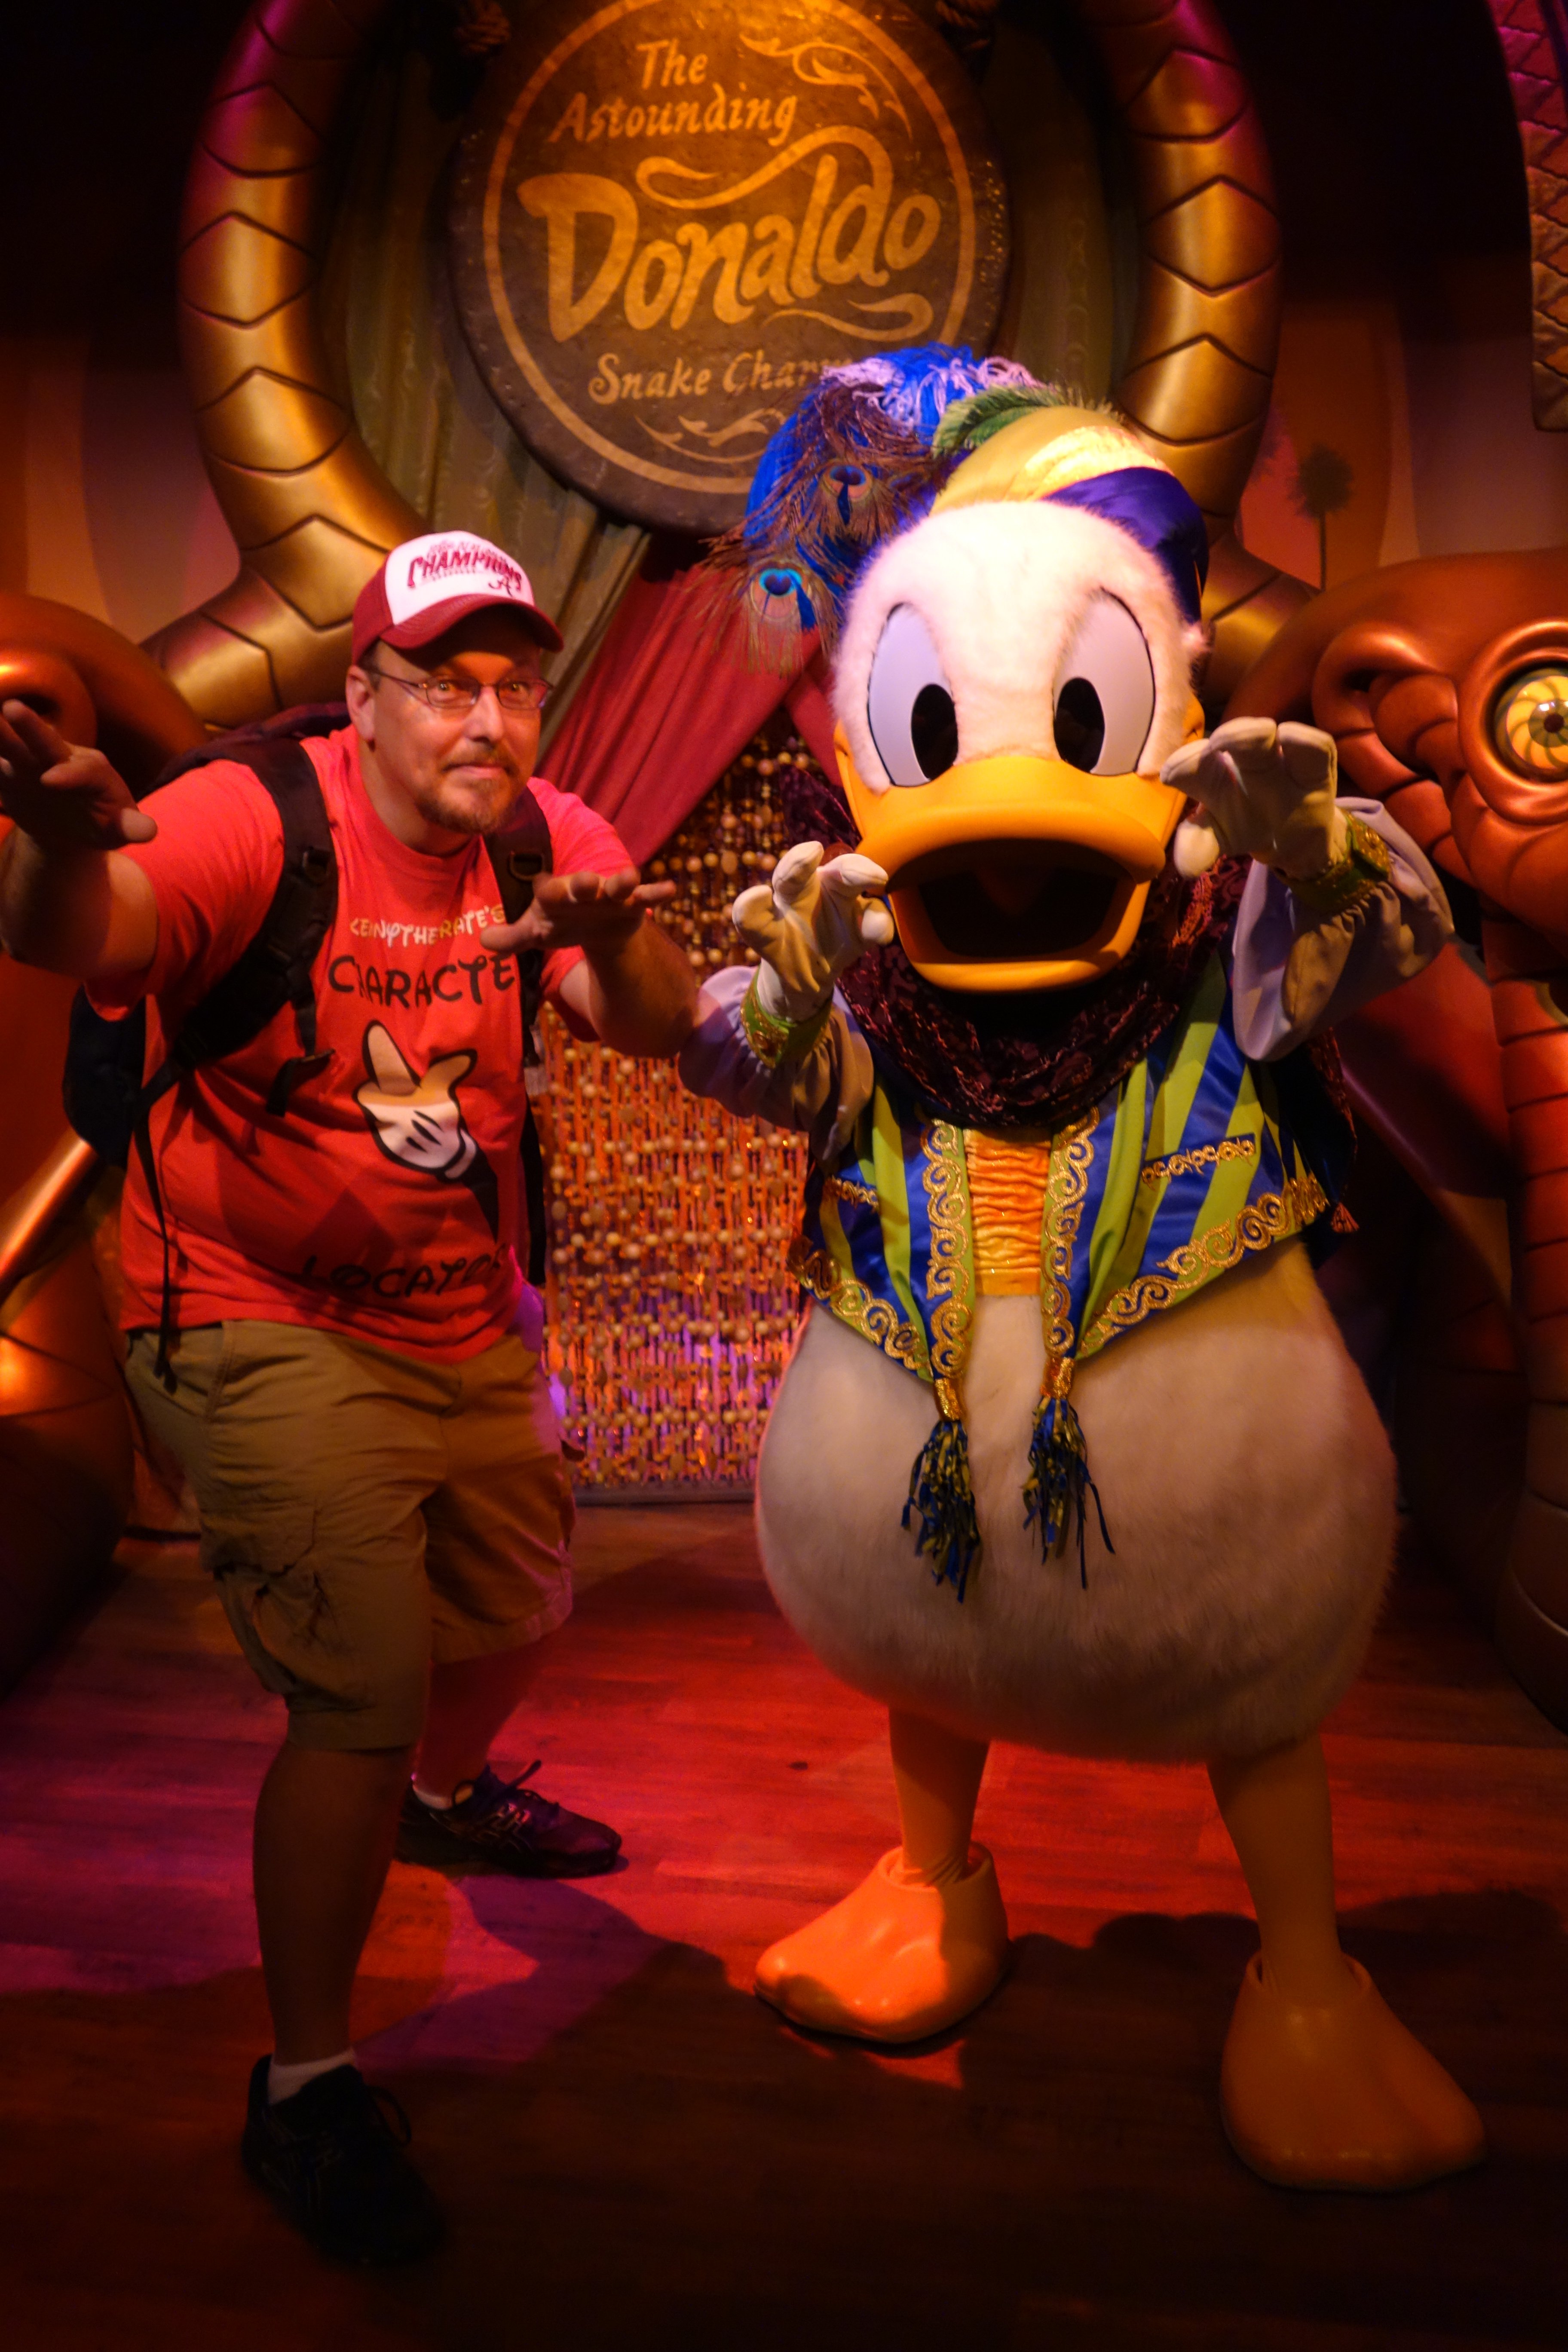 Donald successfully teaches me his charming ability